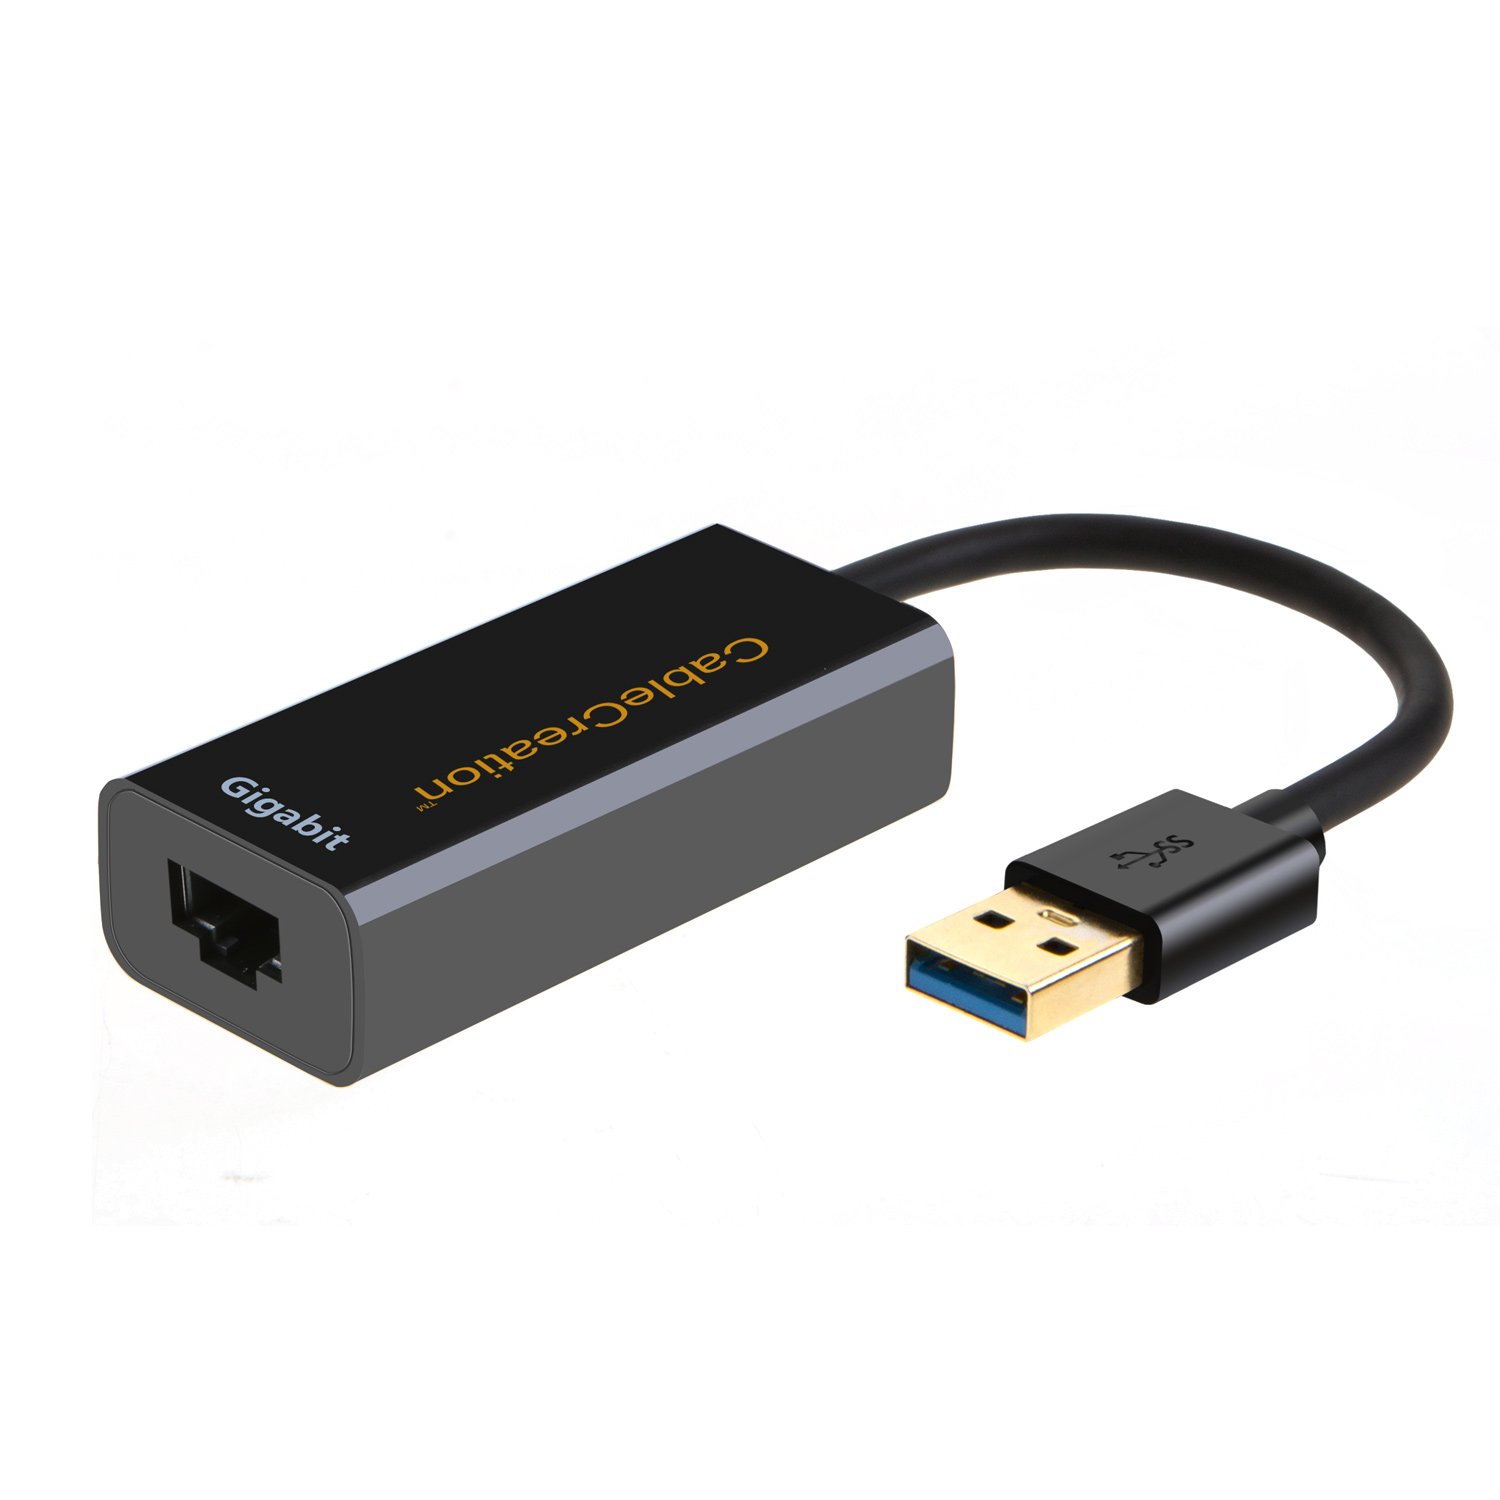 ch9200 usb ethernet adapter driver for windows 7 32 bit